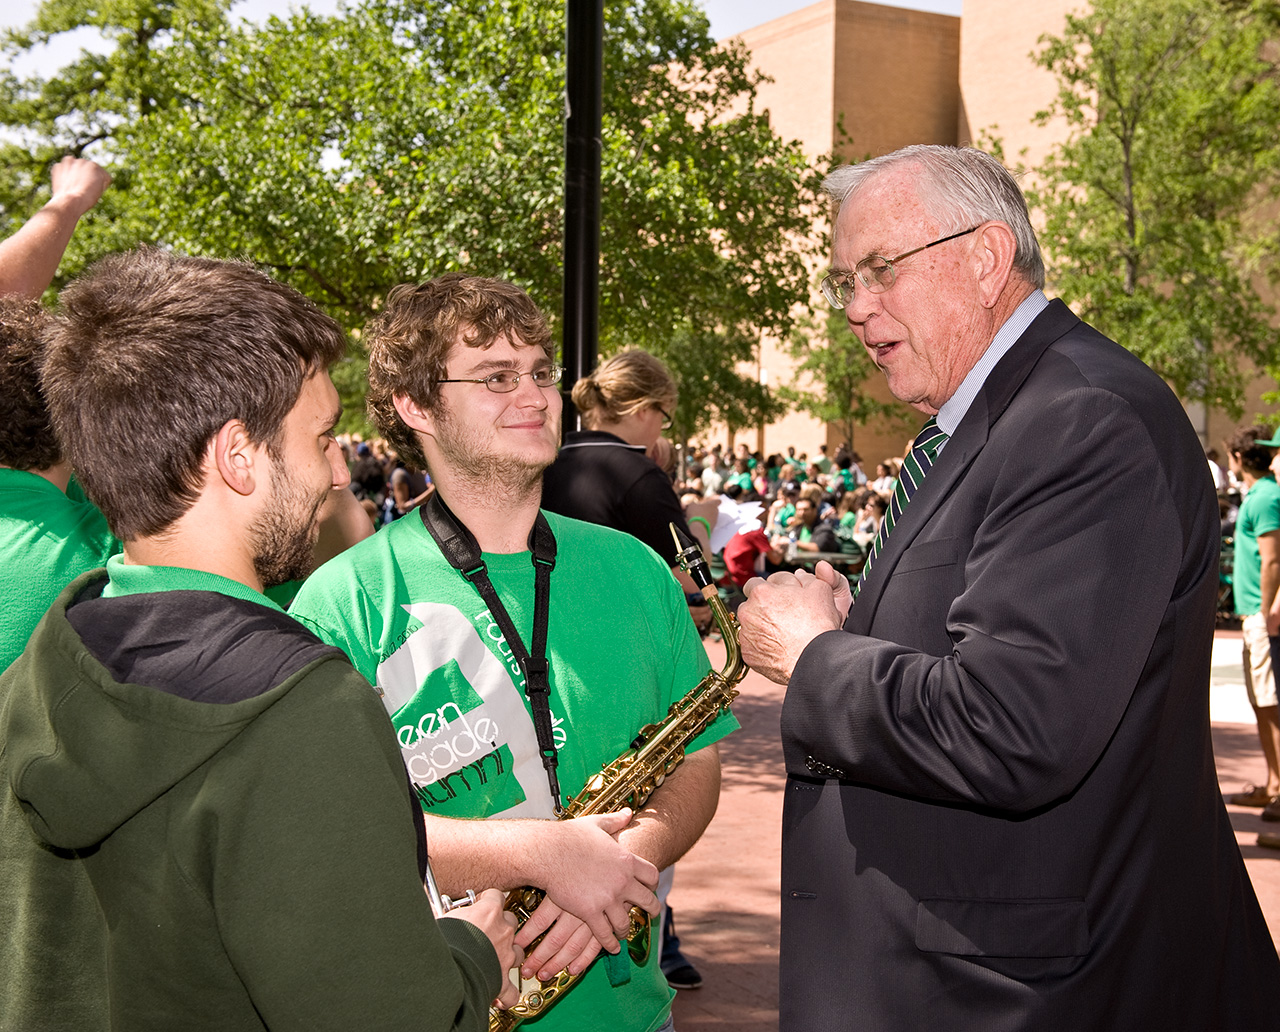 President V. Lane Rawlins visits with students on campus. (Photo by Jonathan Reynolds)